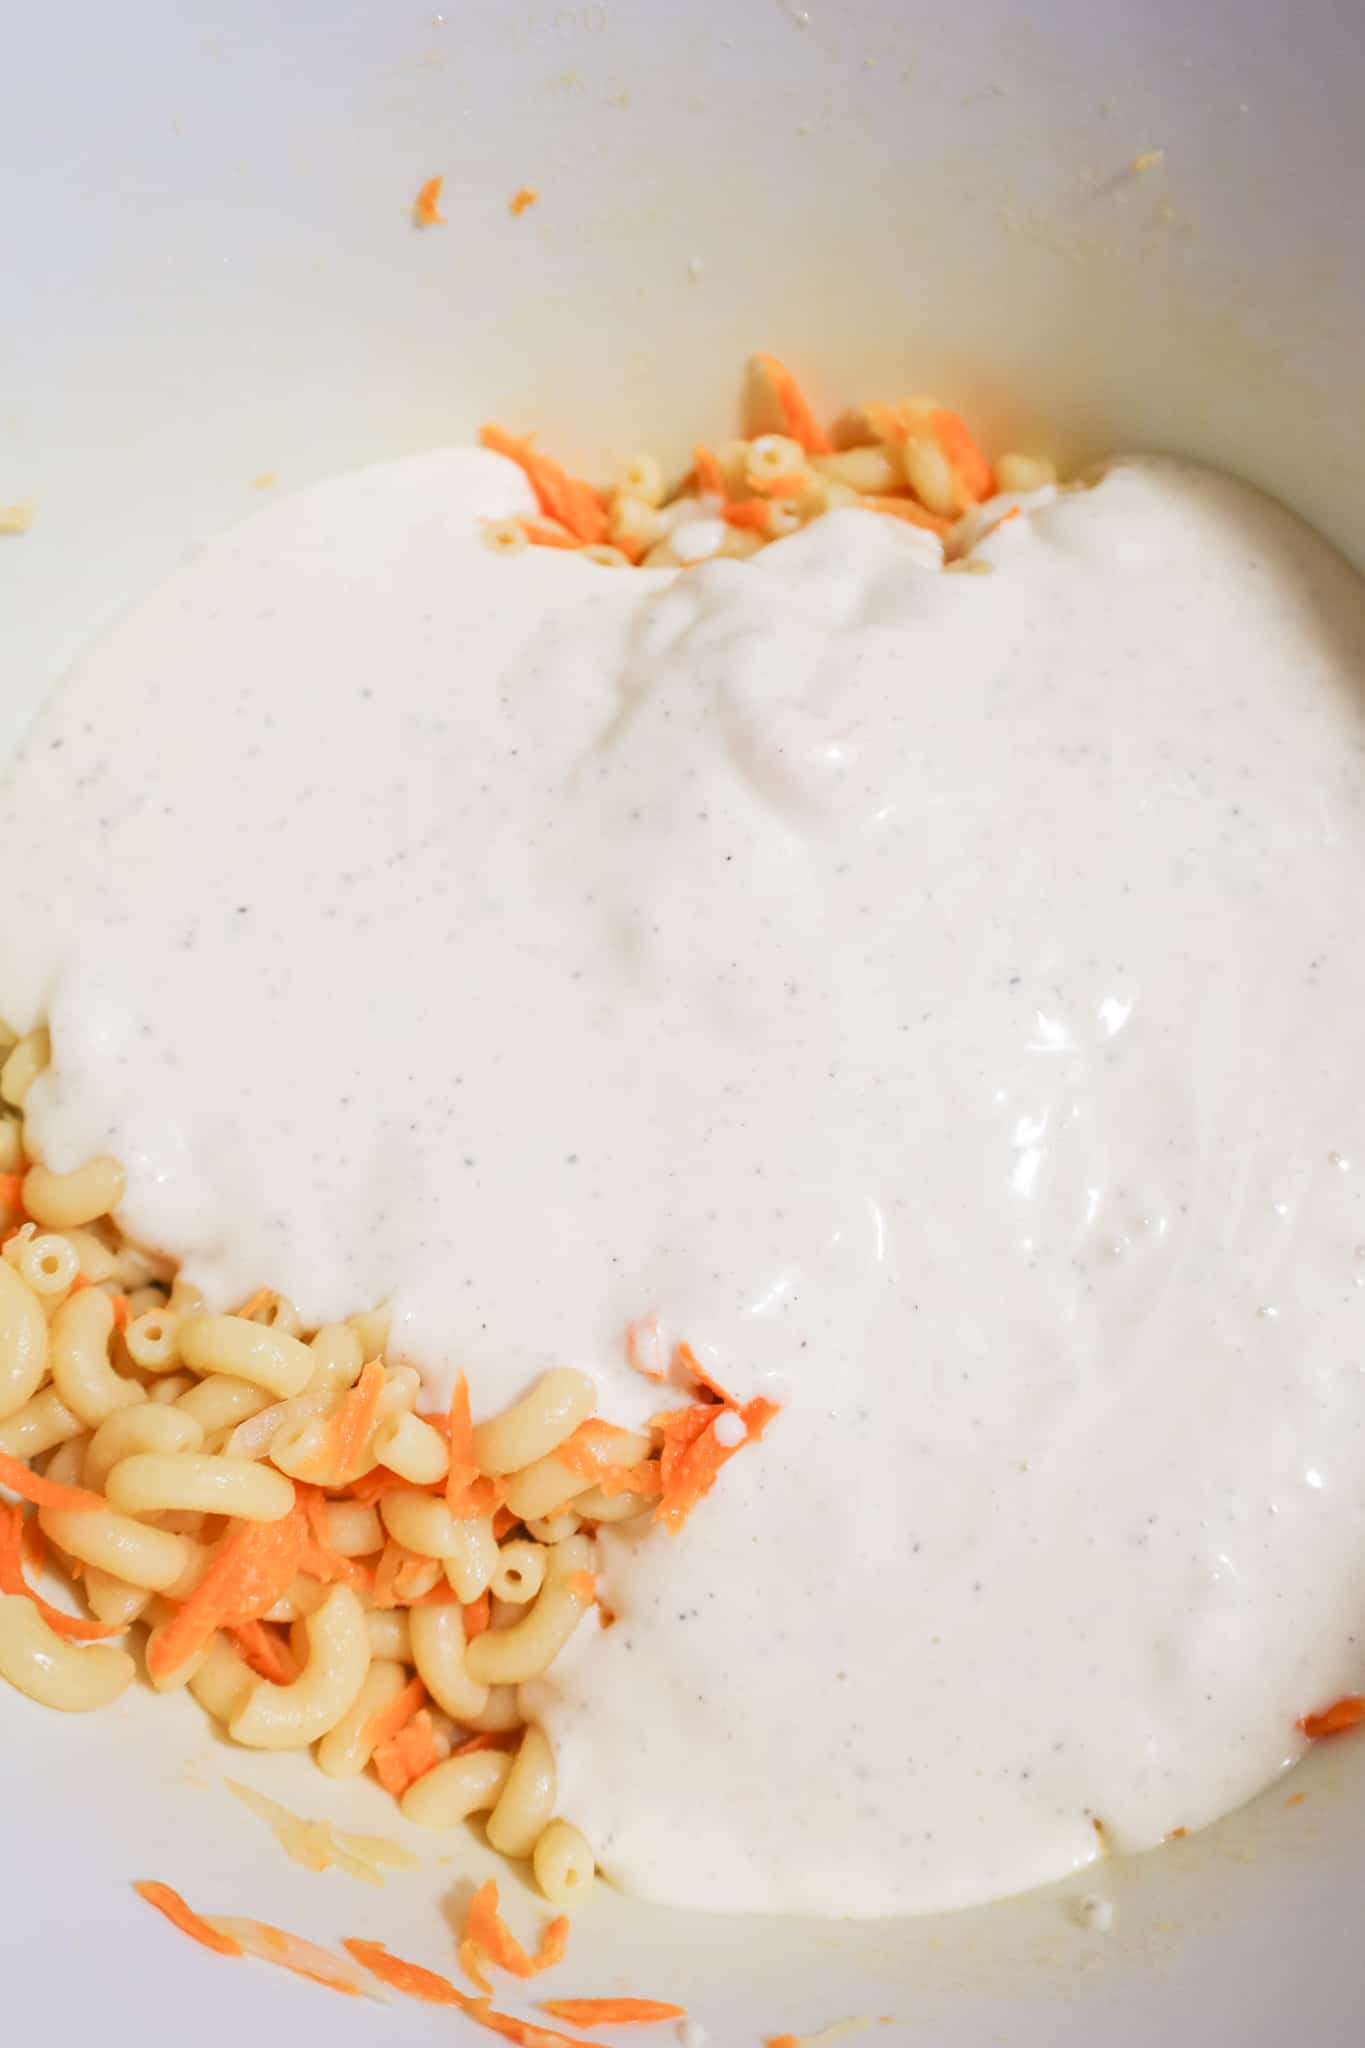 creamy mayo dressing poured over macaroni and grated carrot in a mixing bowl